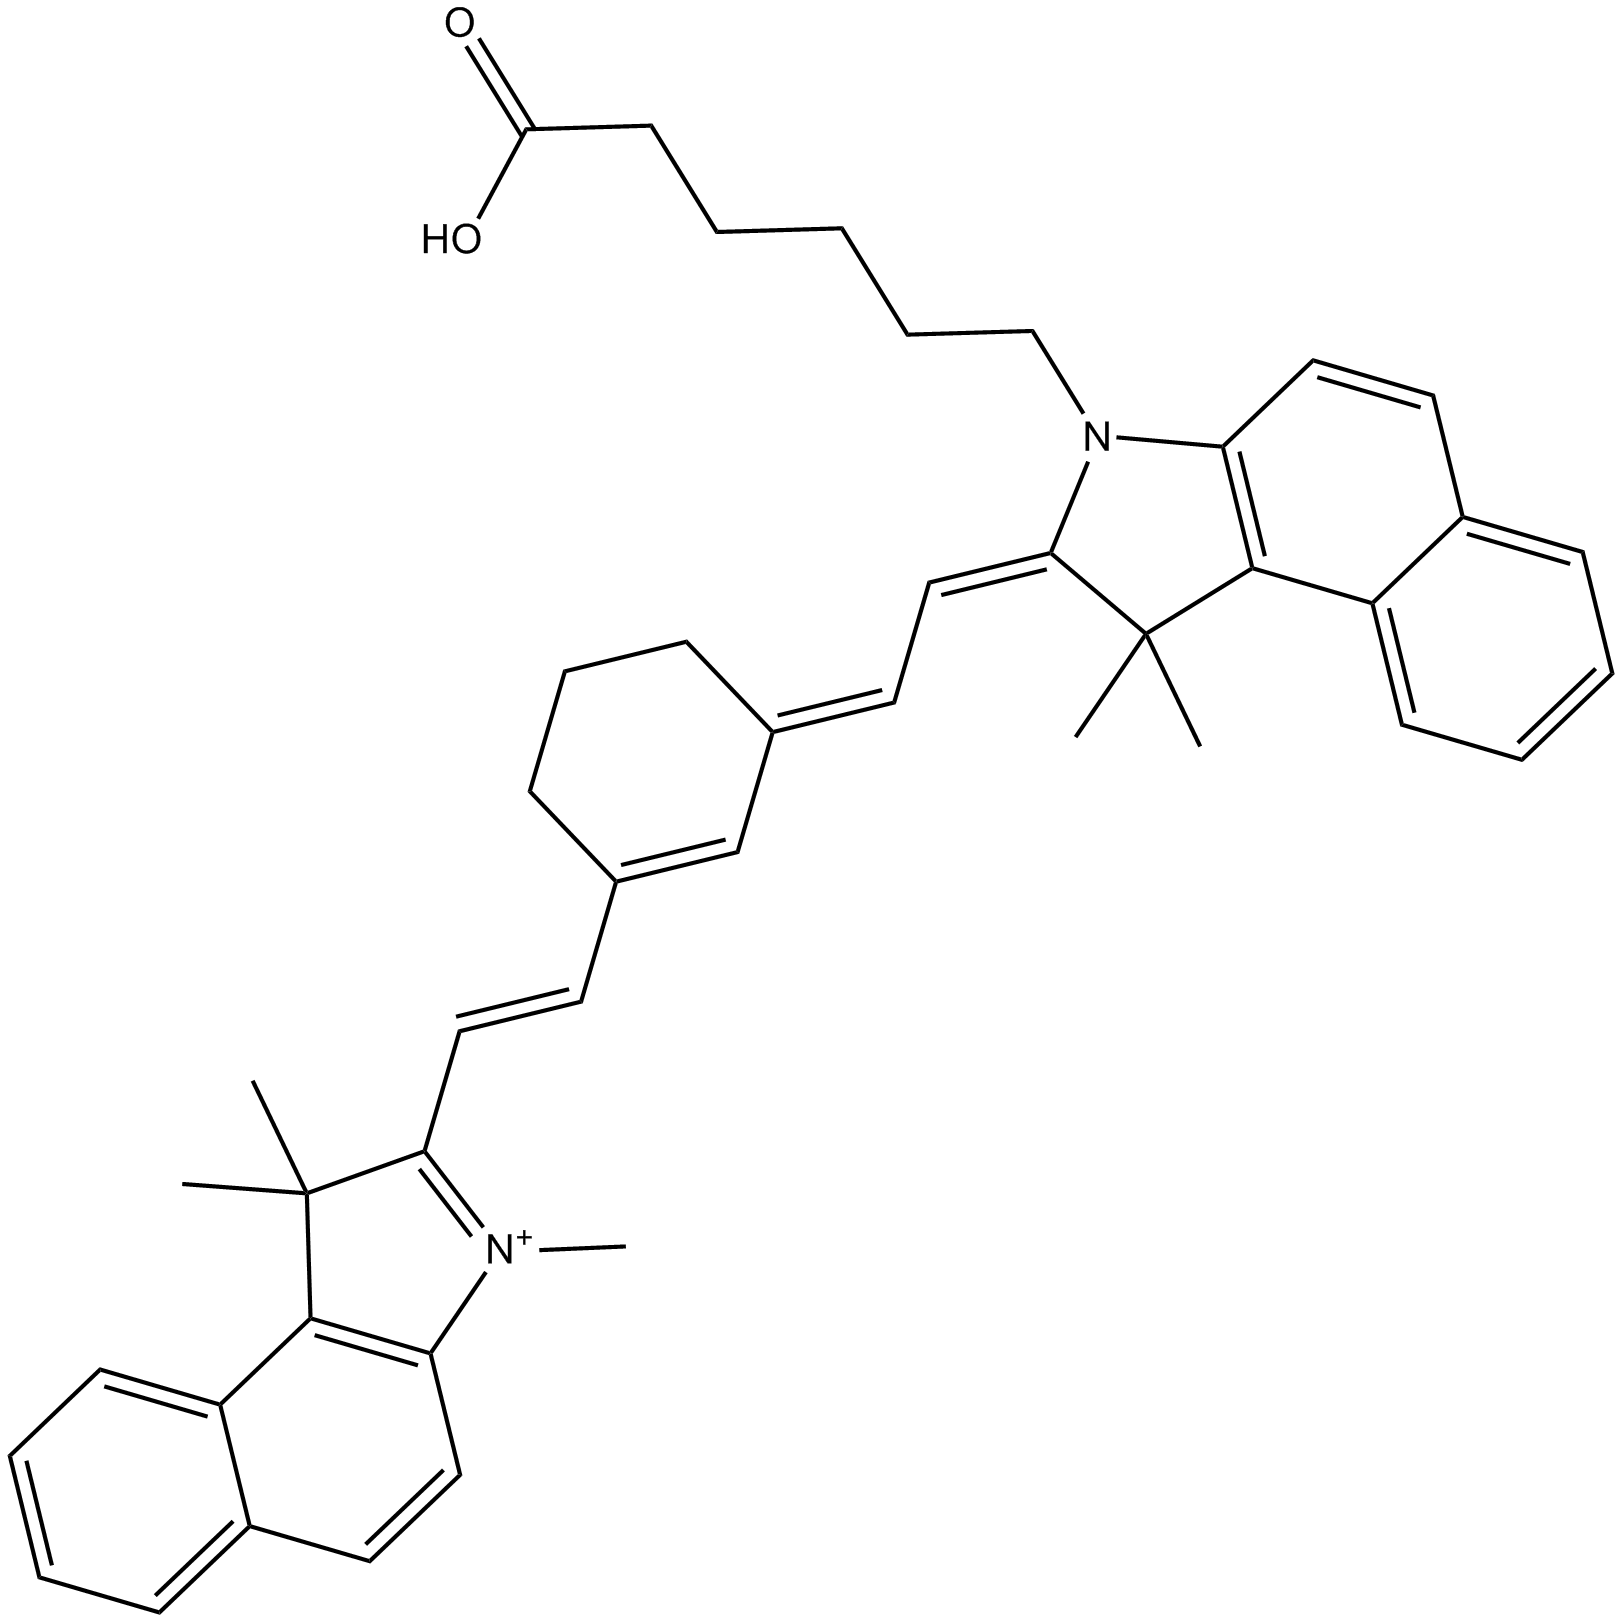 Cy7.5 carboxylic acid (non-sulfonated)